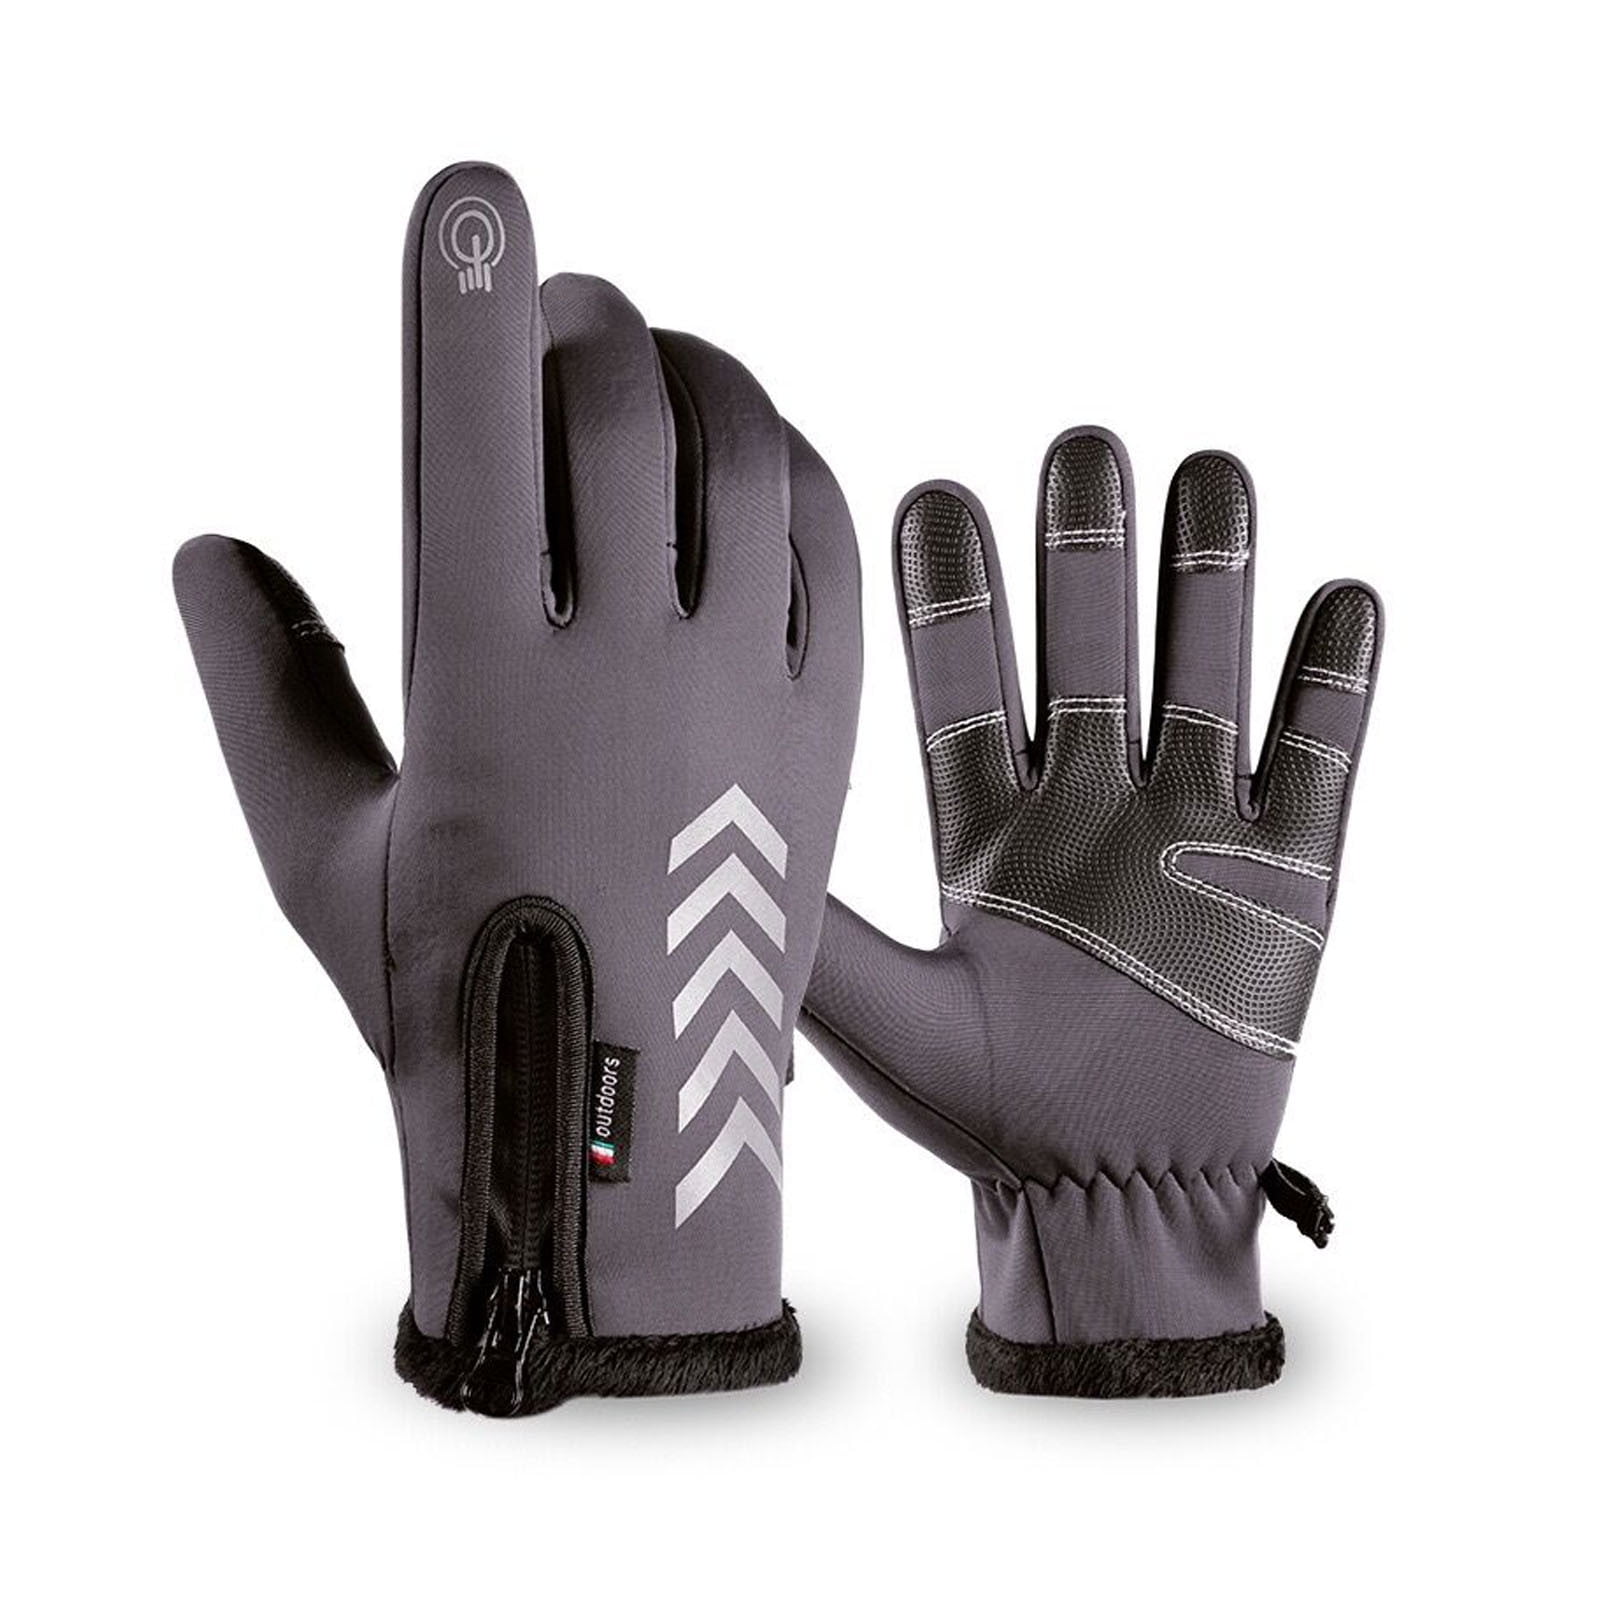 warm thermal gloves cycling running driving gloves